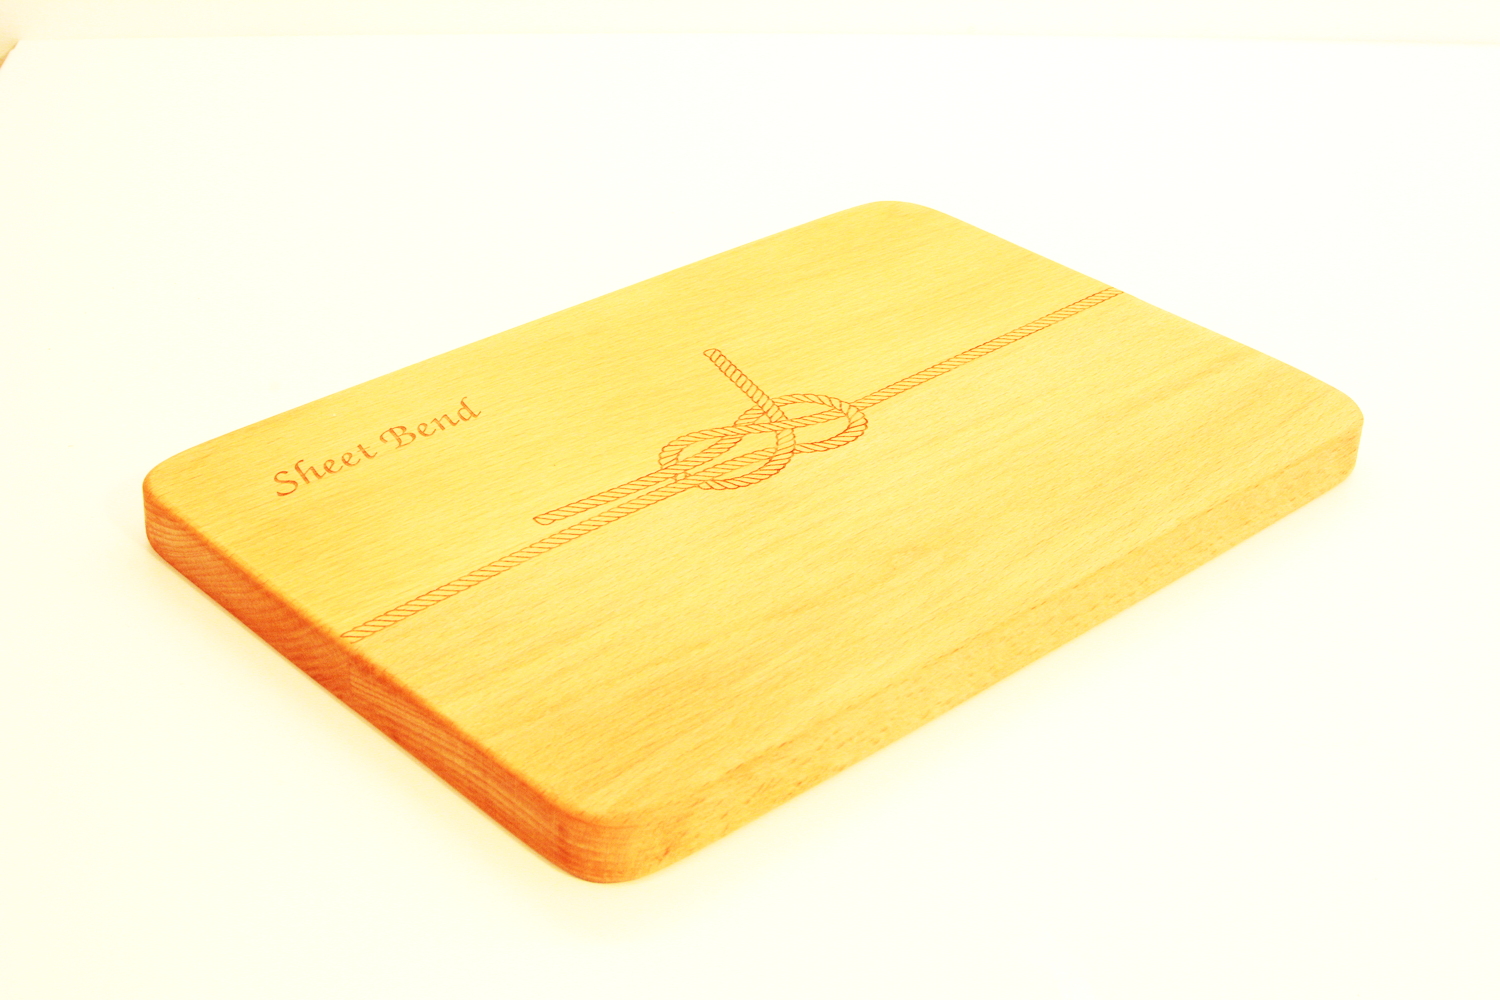 Cutting Board with Sheet Bend engraved